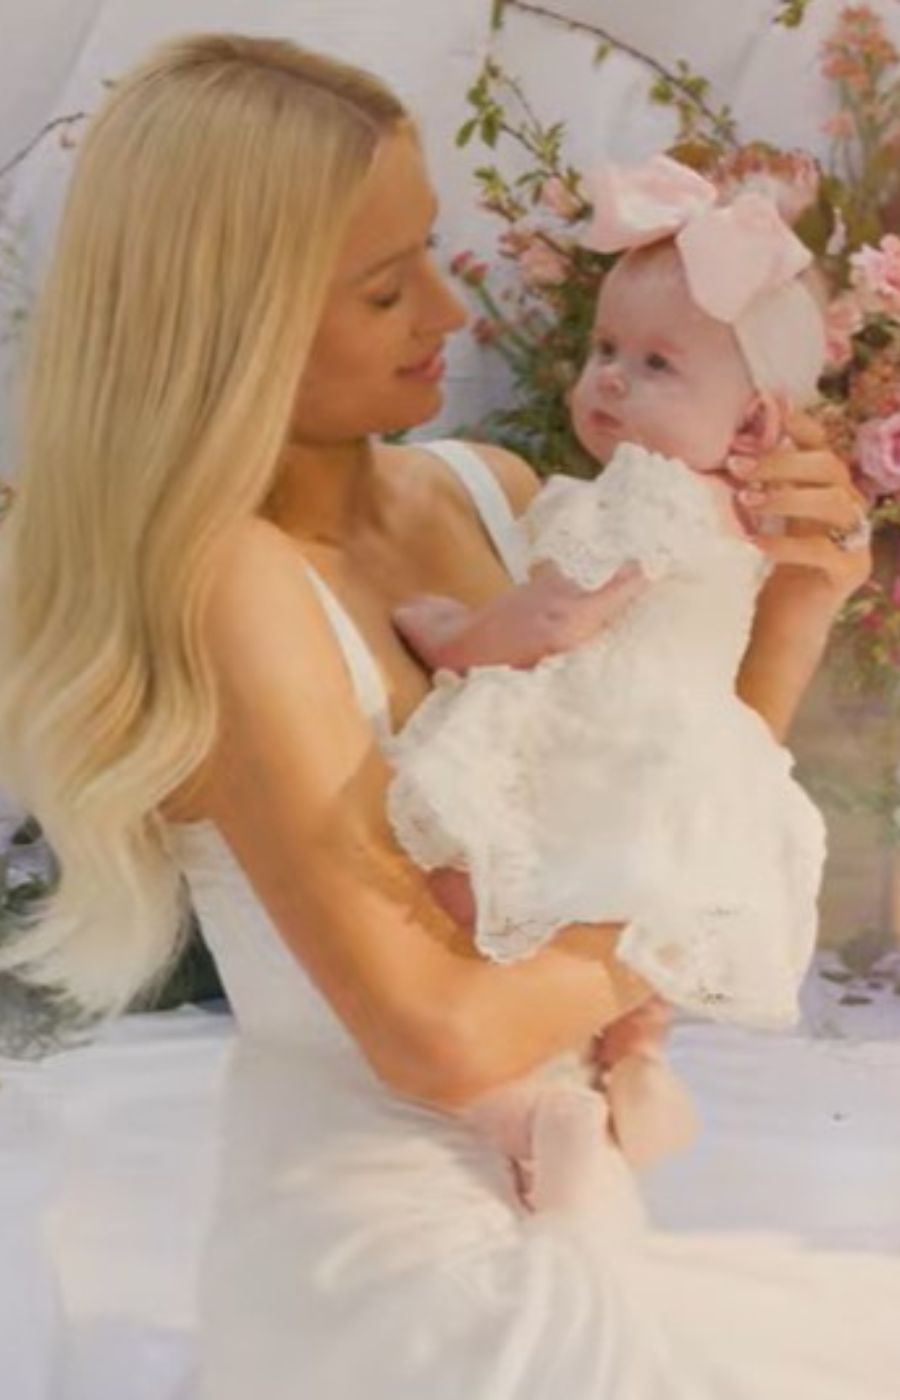 Paris Hilton in a music video with her daughter